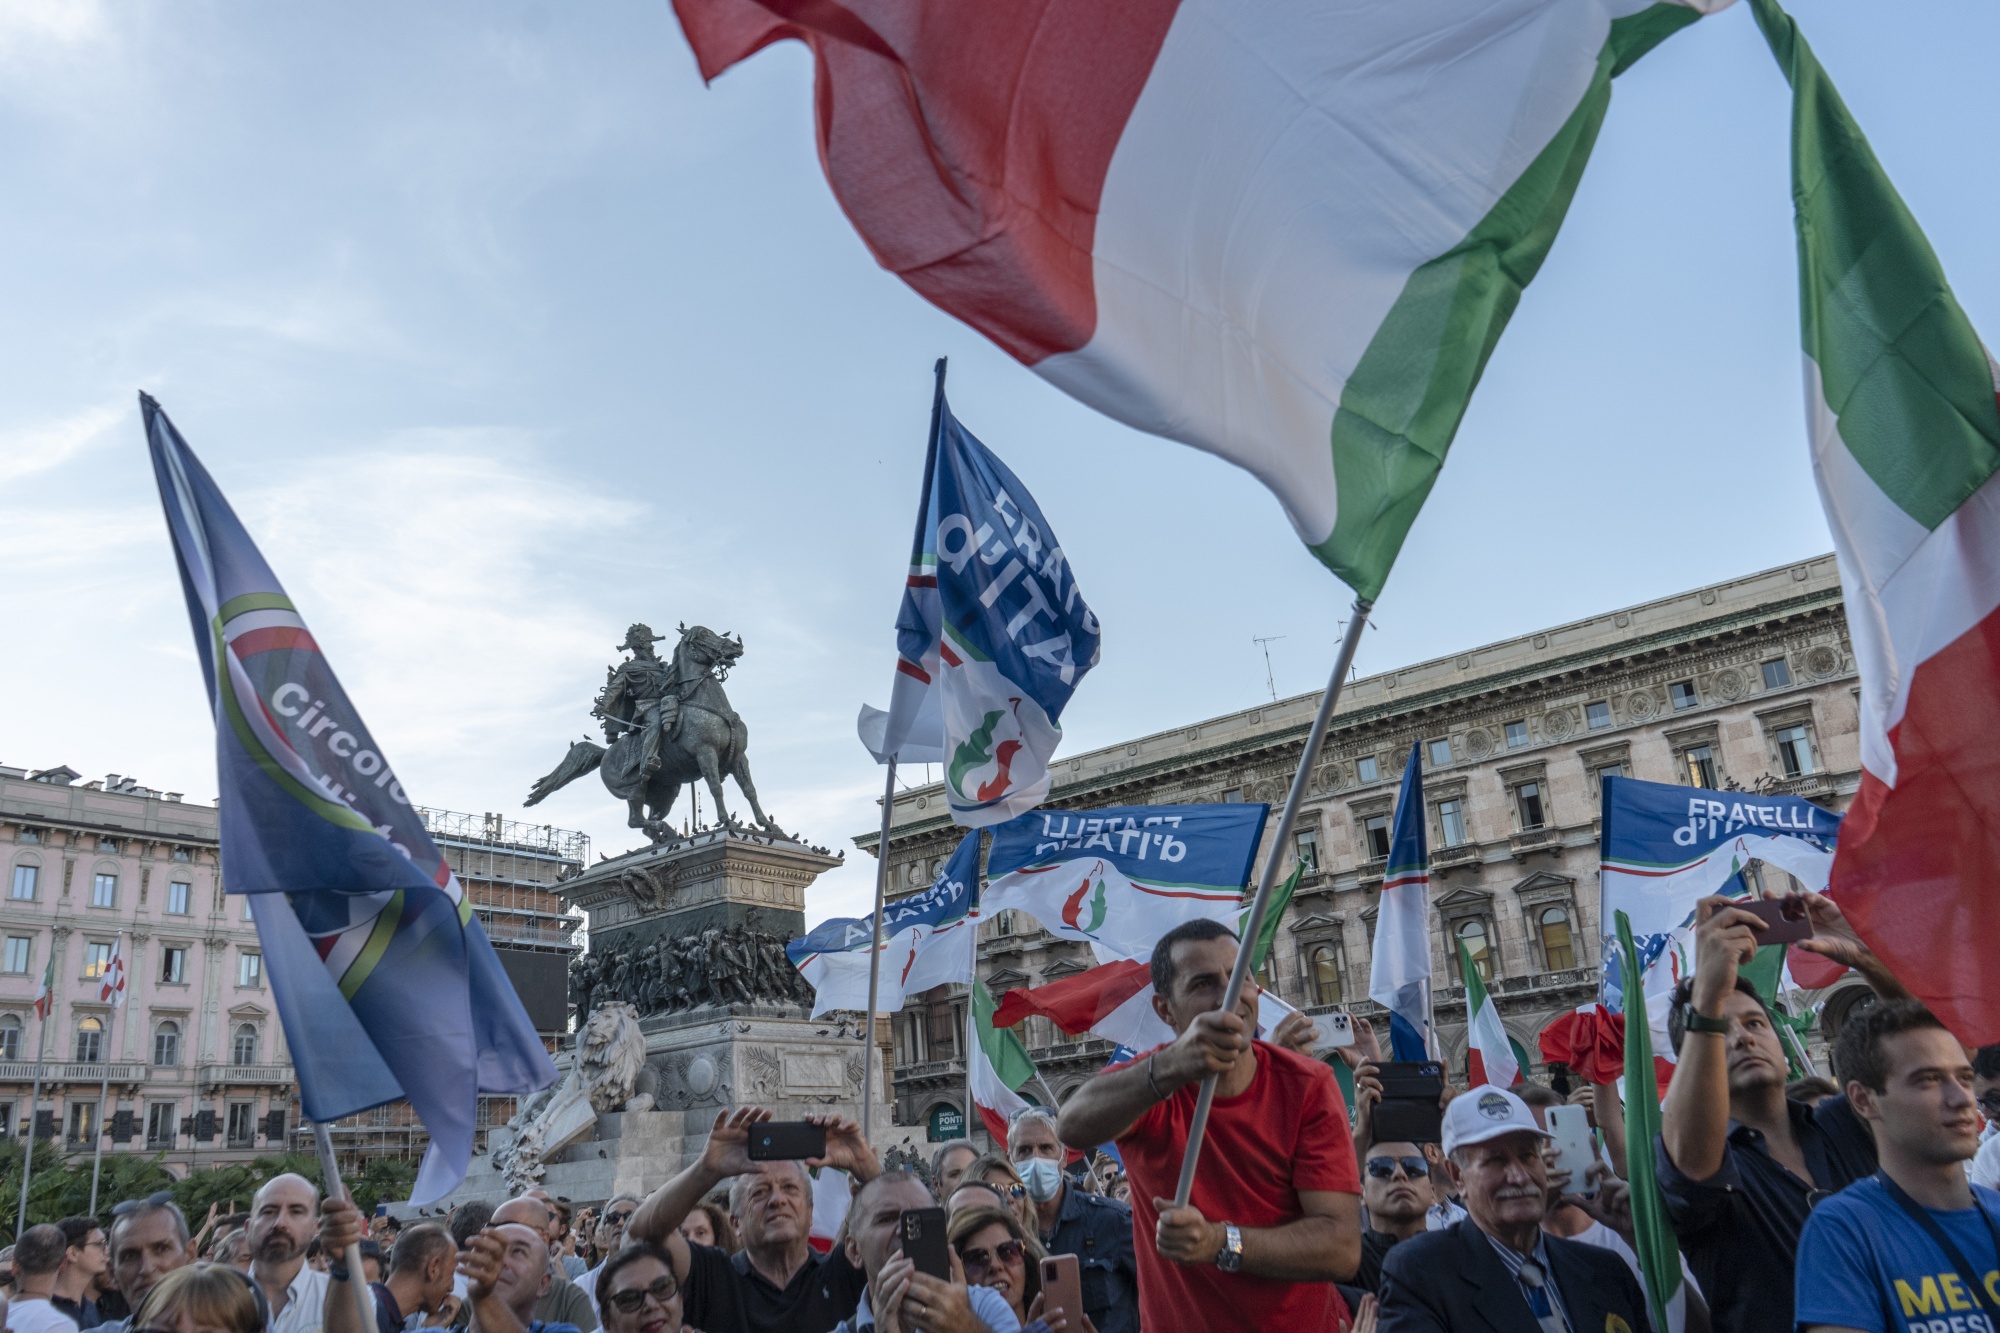 Italy’s right-wingers look headed for a landslide victory that international markets don’t want.